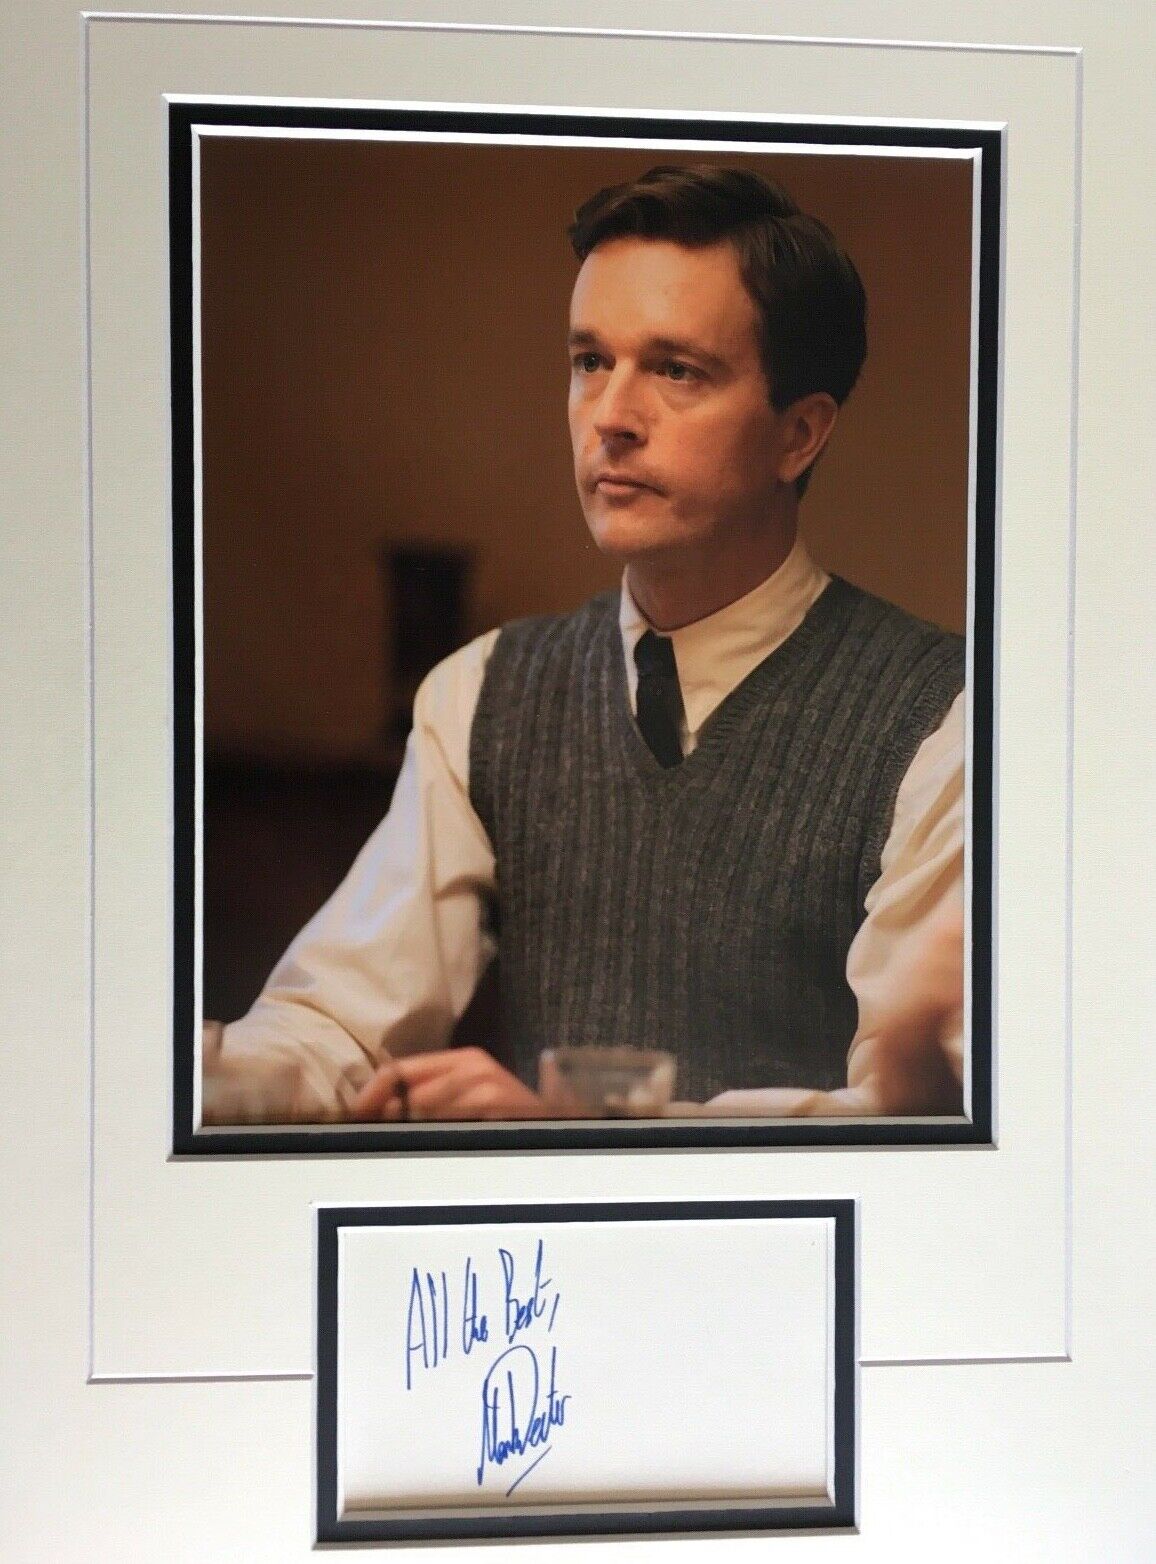 MARK DEXTER - POPULAR BRITISH ACTOR - EXCELLENT SIGNED Photo Poster painting DISPLAY